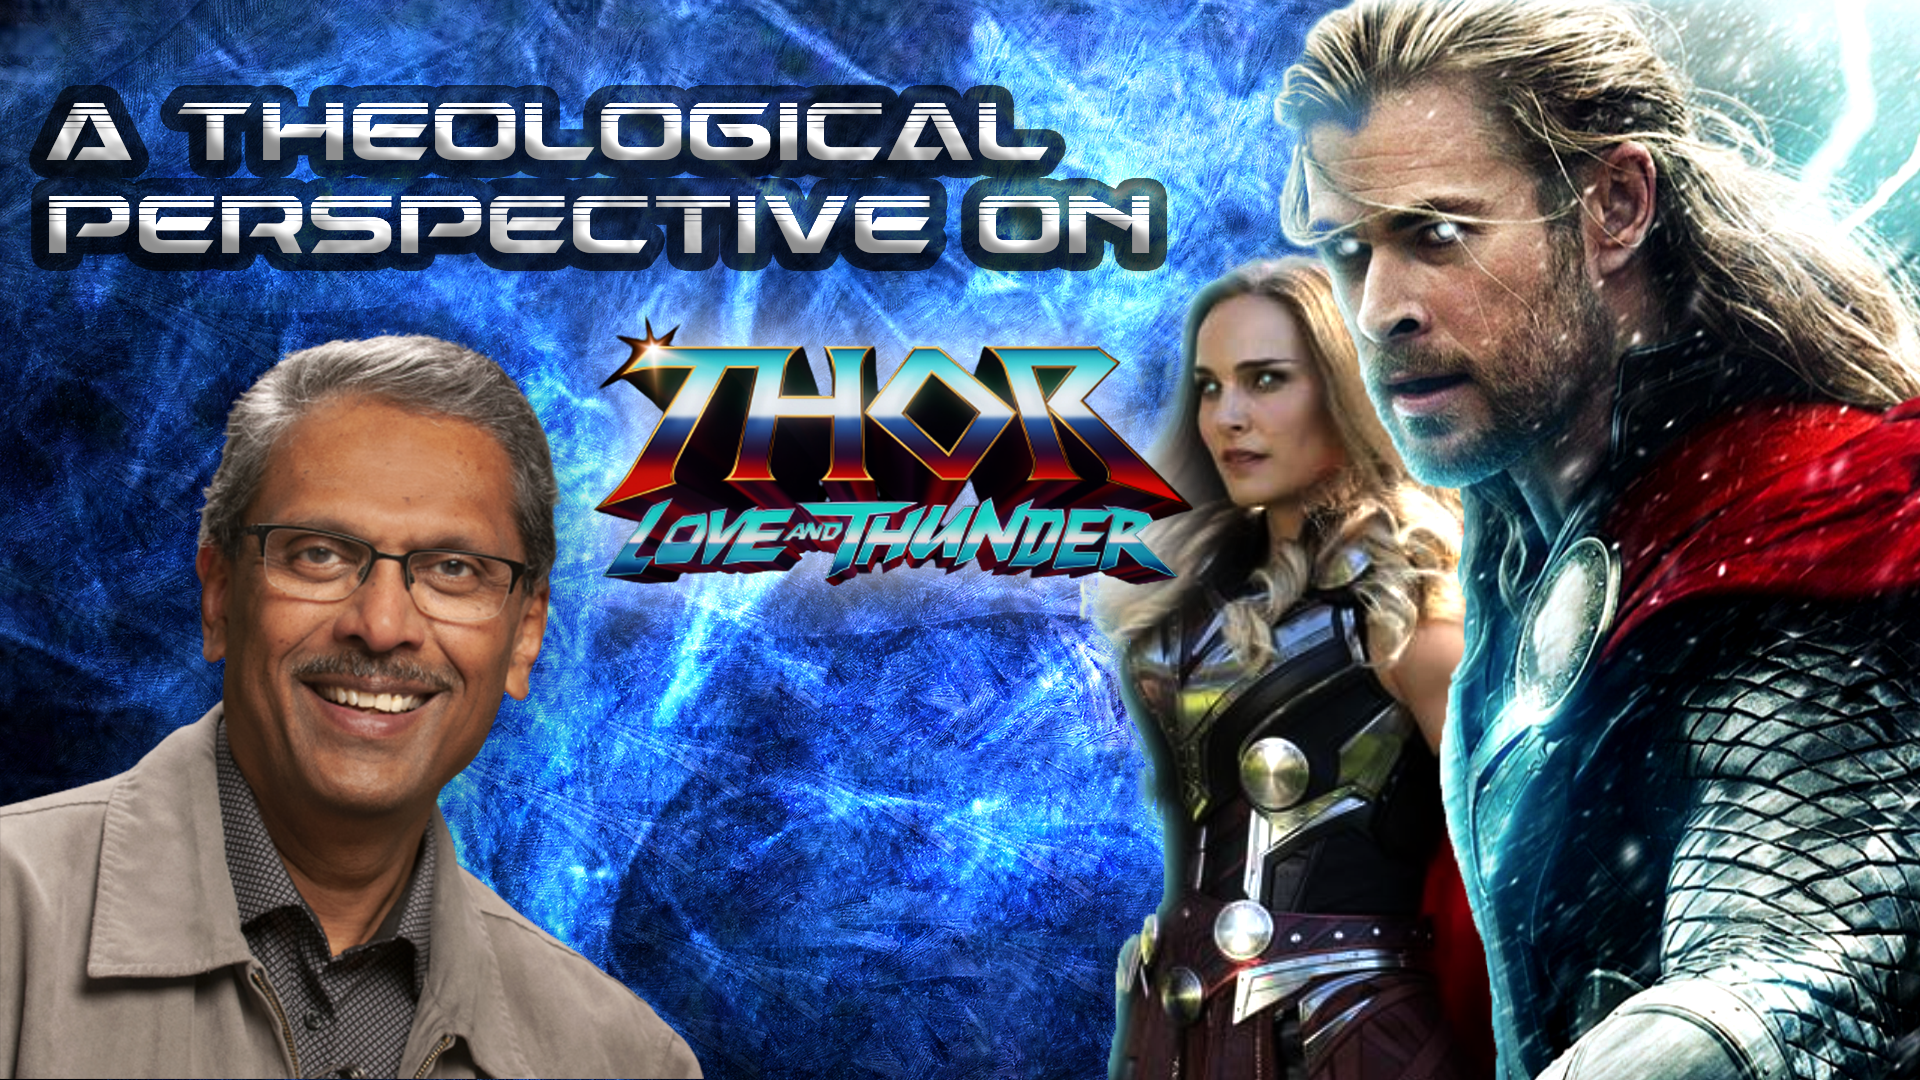 Dr. Richard's newest article about the newest release of Thor Love & Thunder